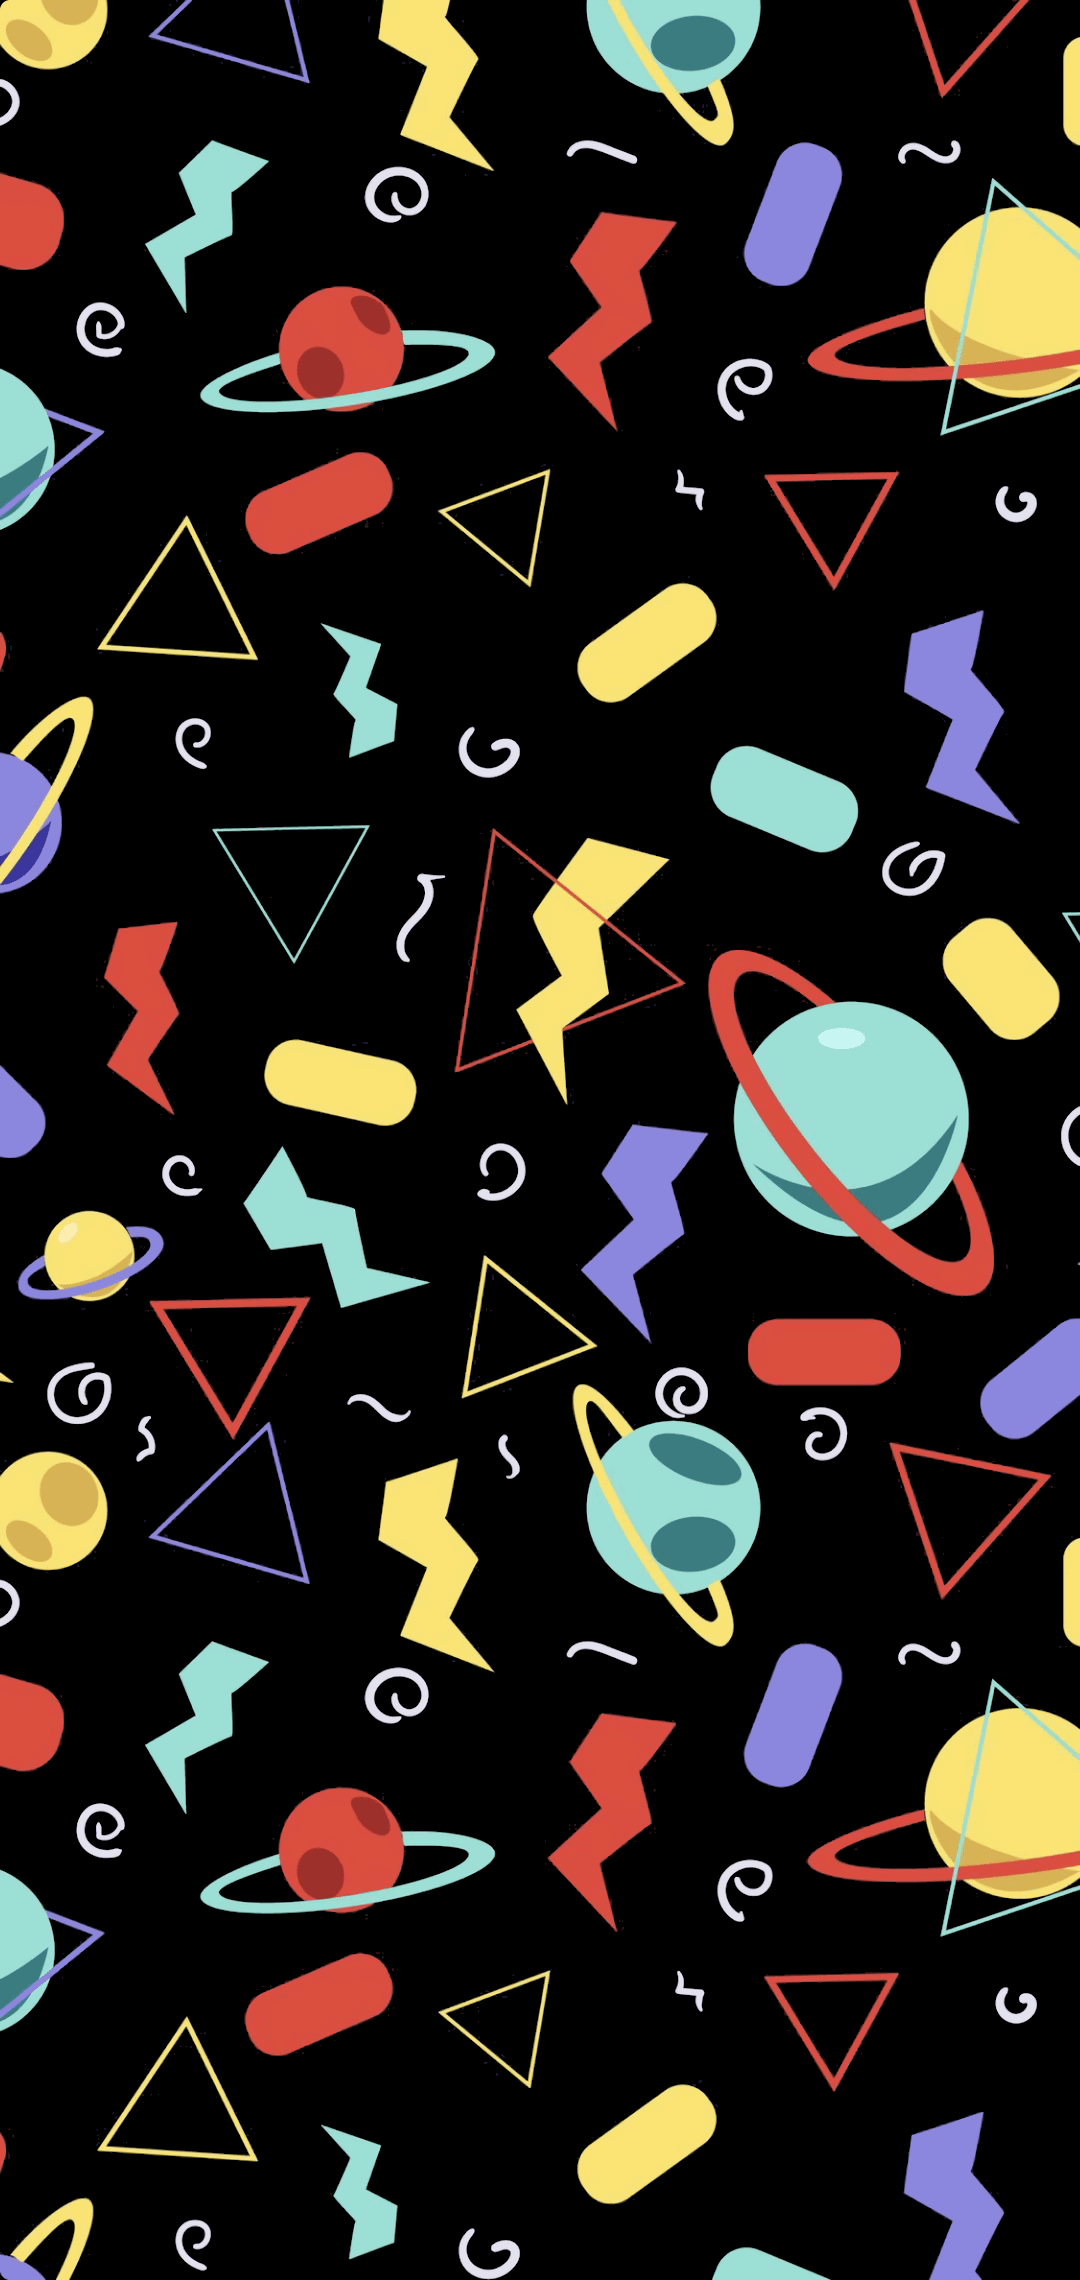 A black wallpaper with colorful geometric shapes and planets. - Arcade